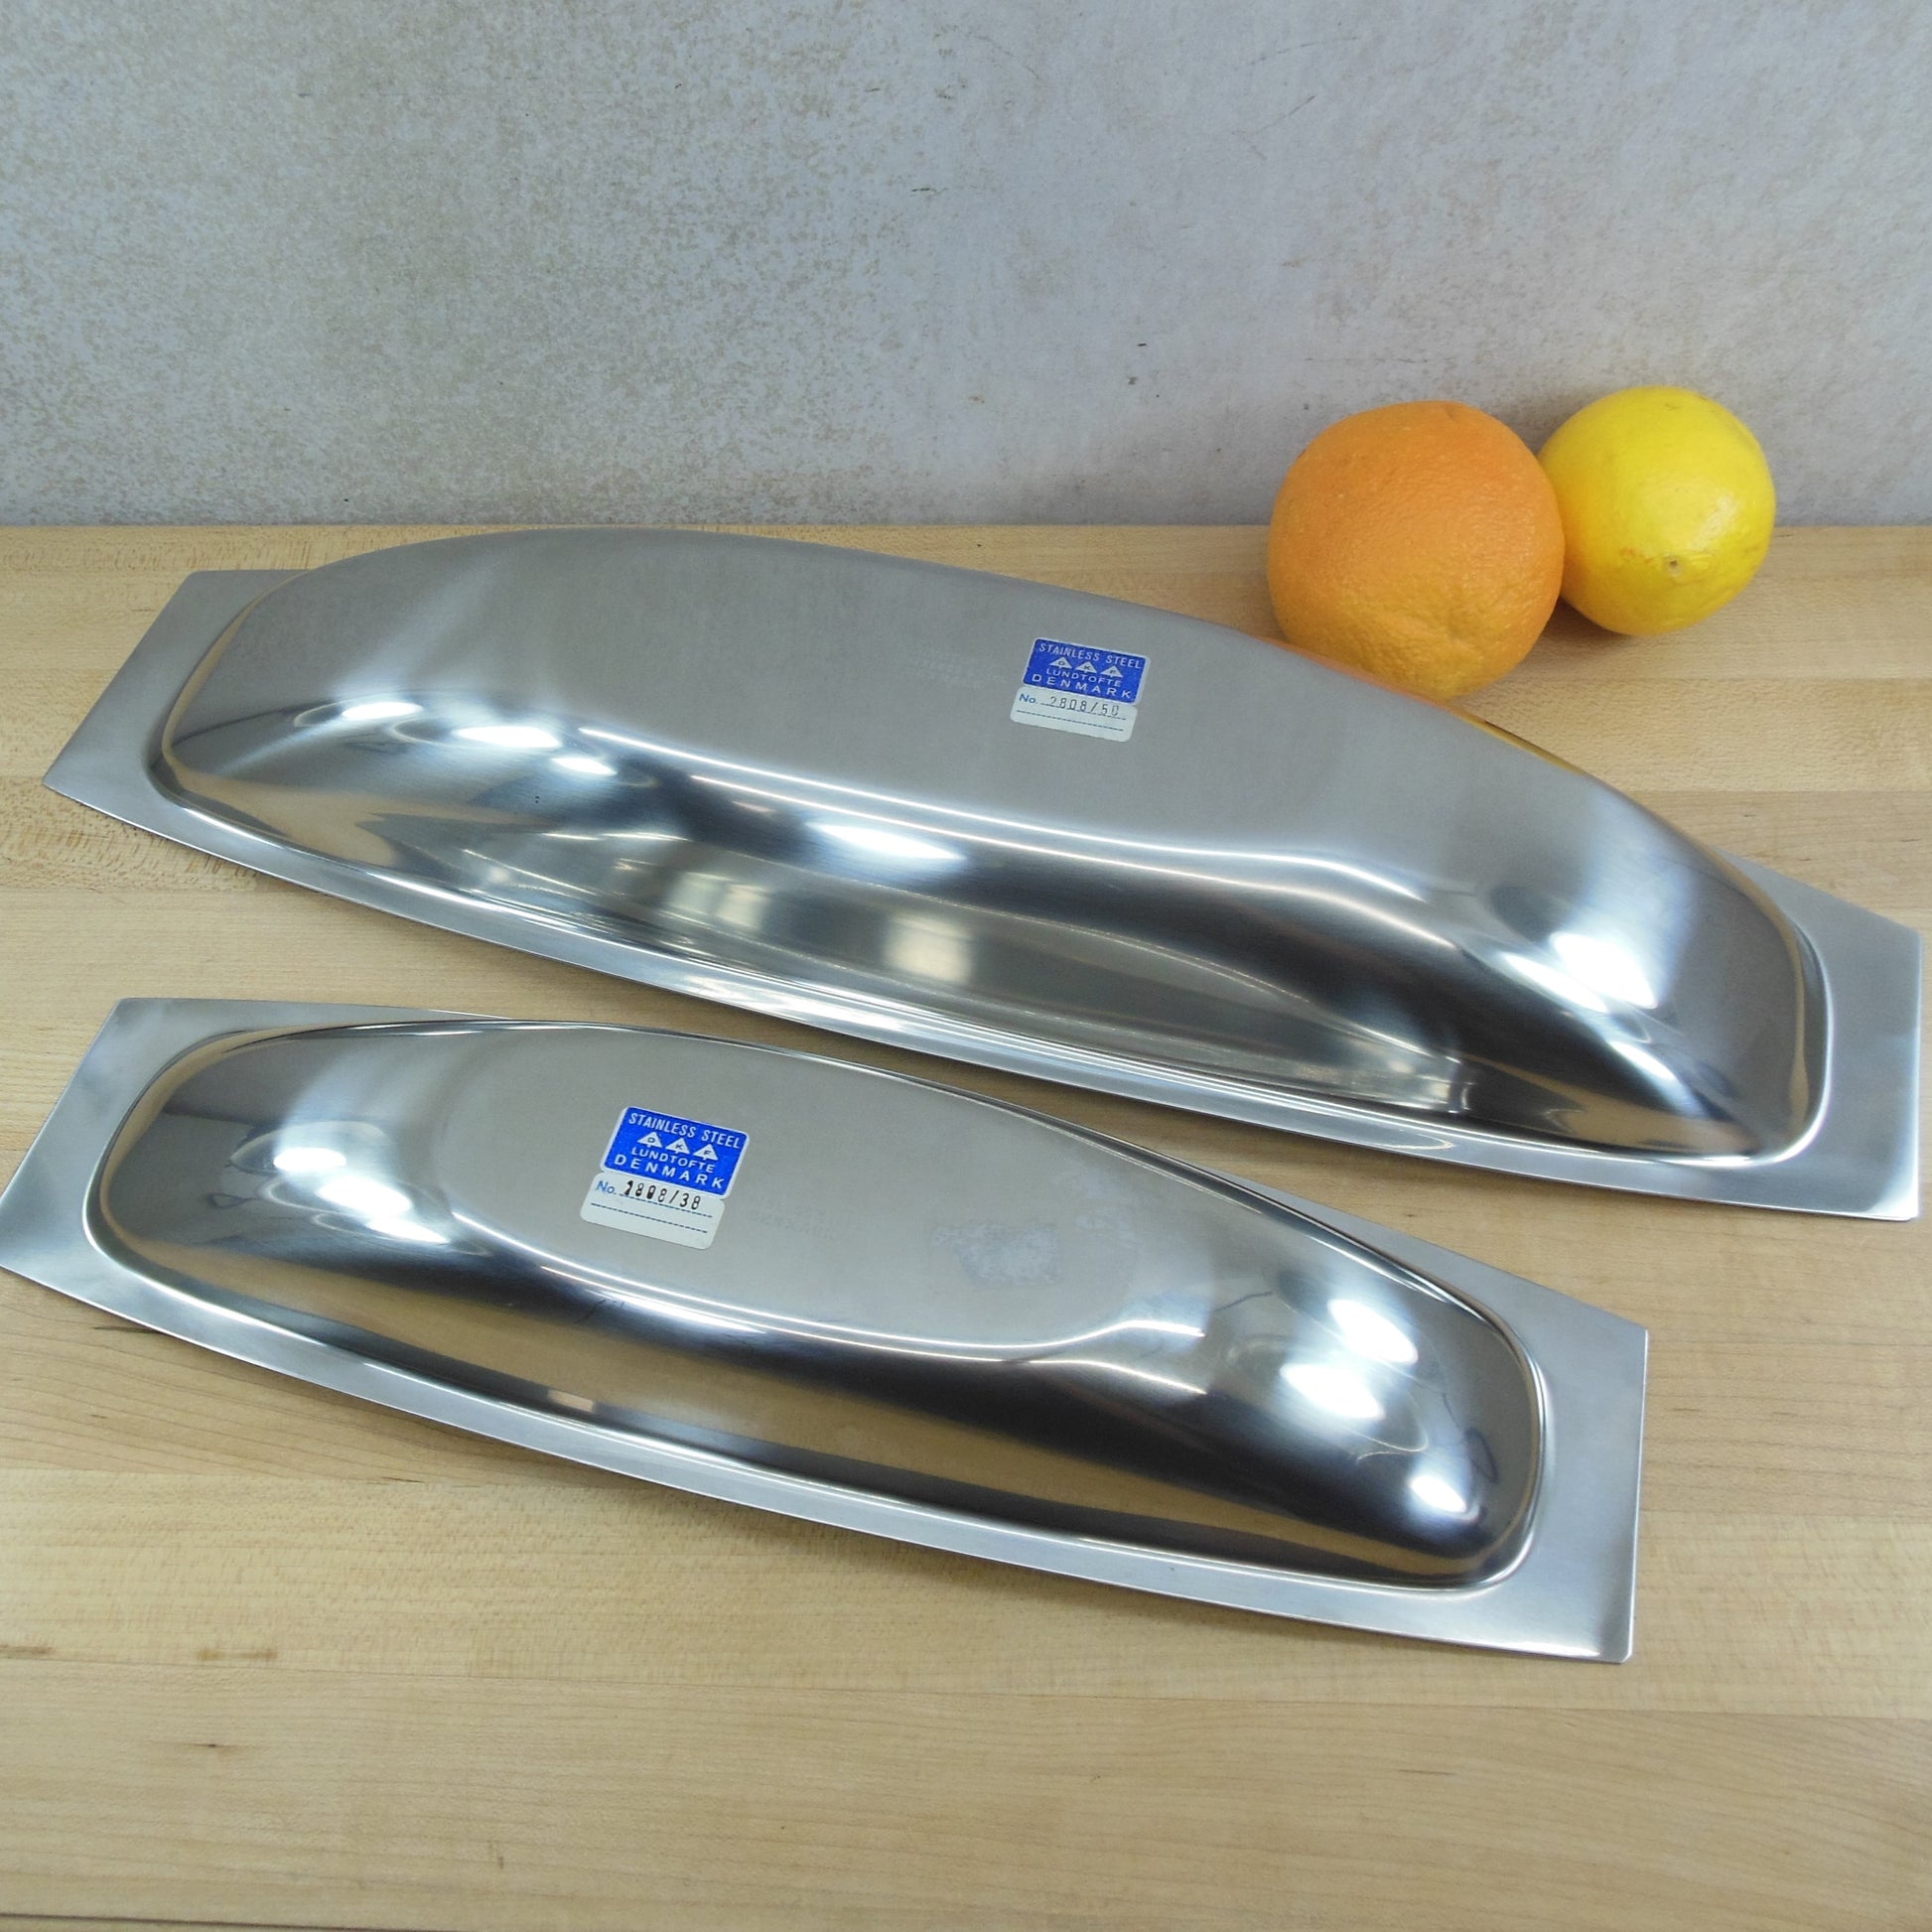 DKF Lundtofte Denmark Stainless Pair Long Serving Bowls NOS long narrow